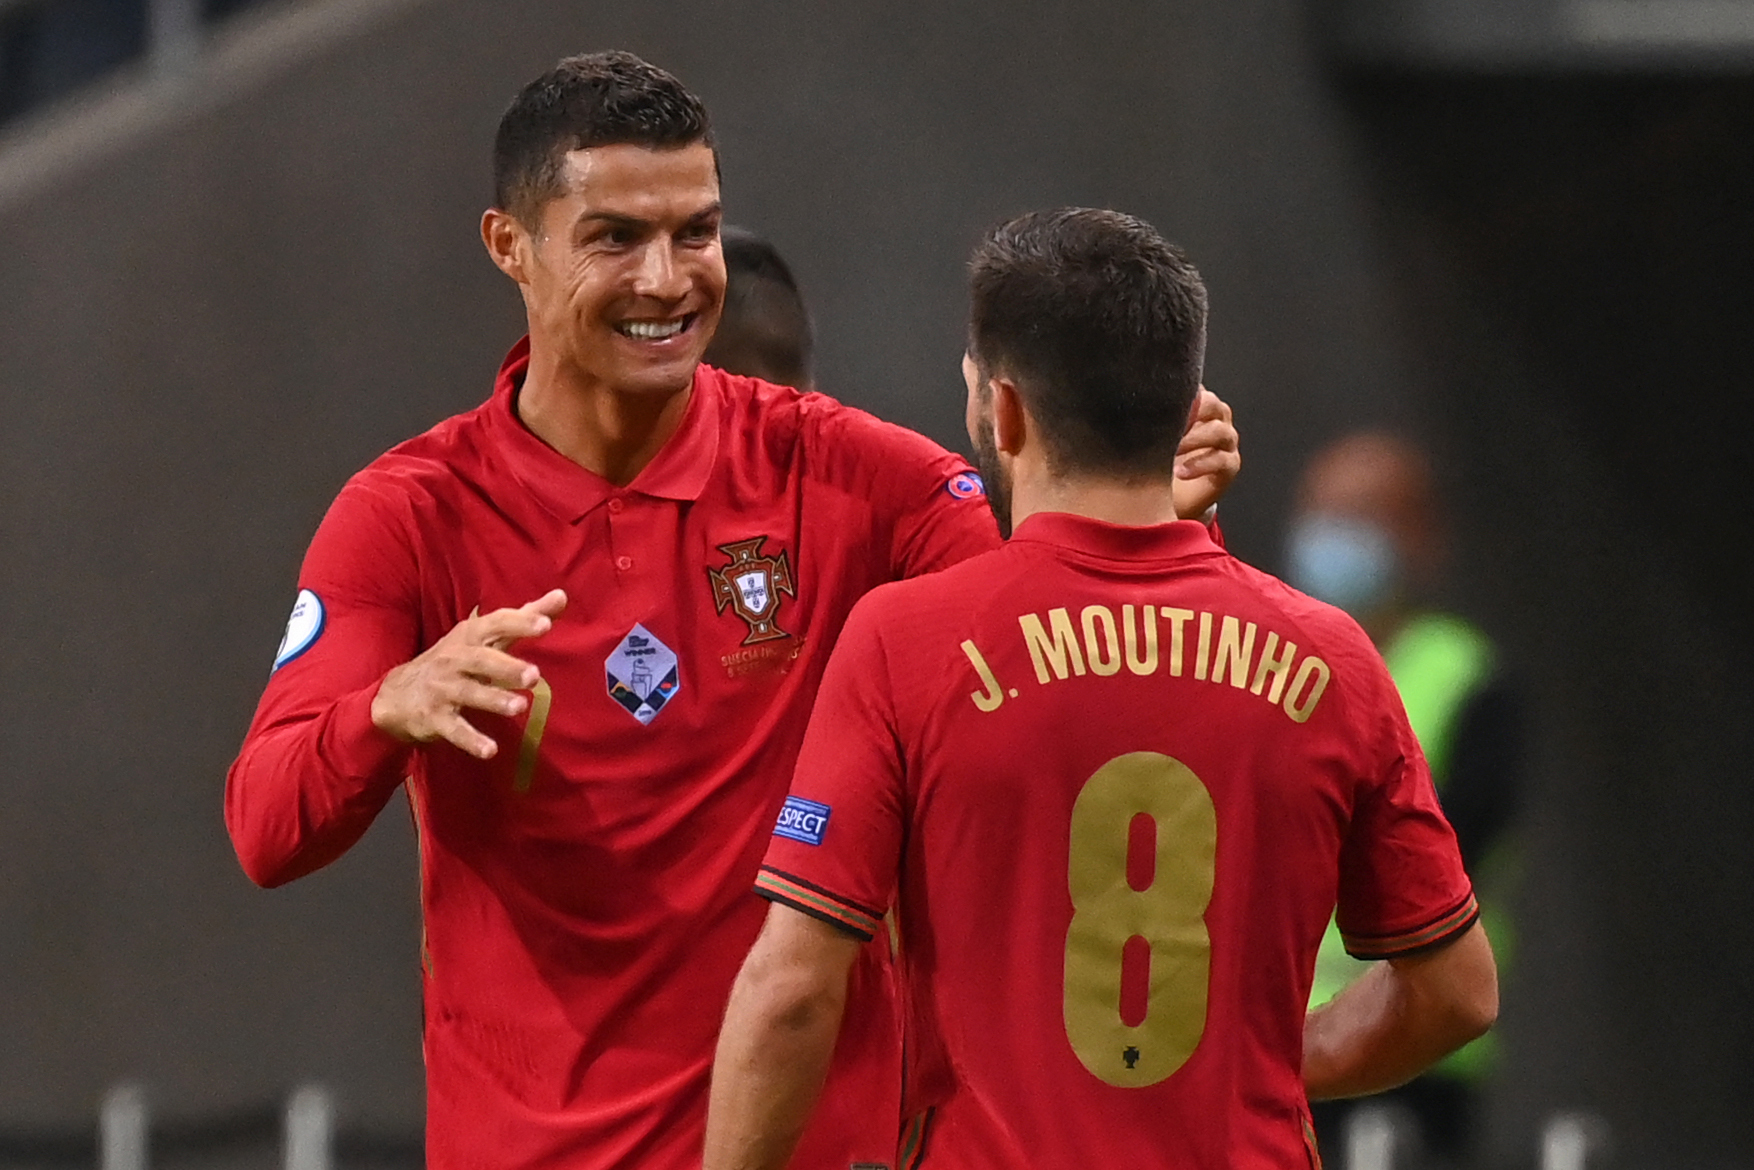 Ronaldo becomes 2nd footballer in history to score 100 international goals